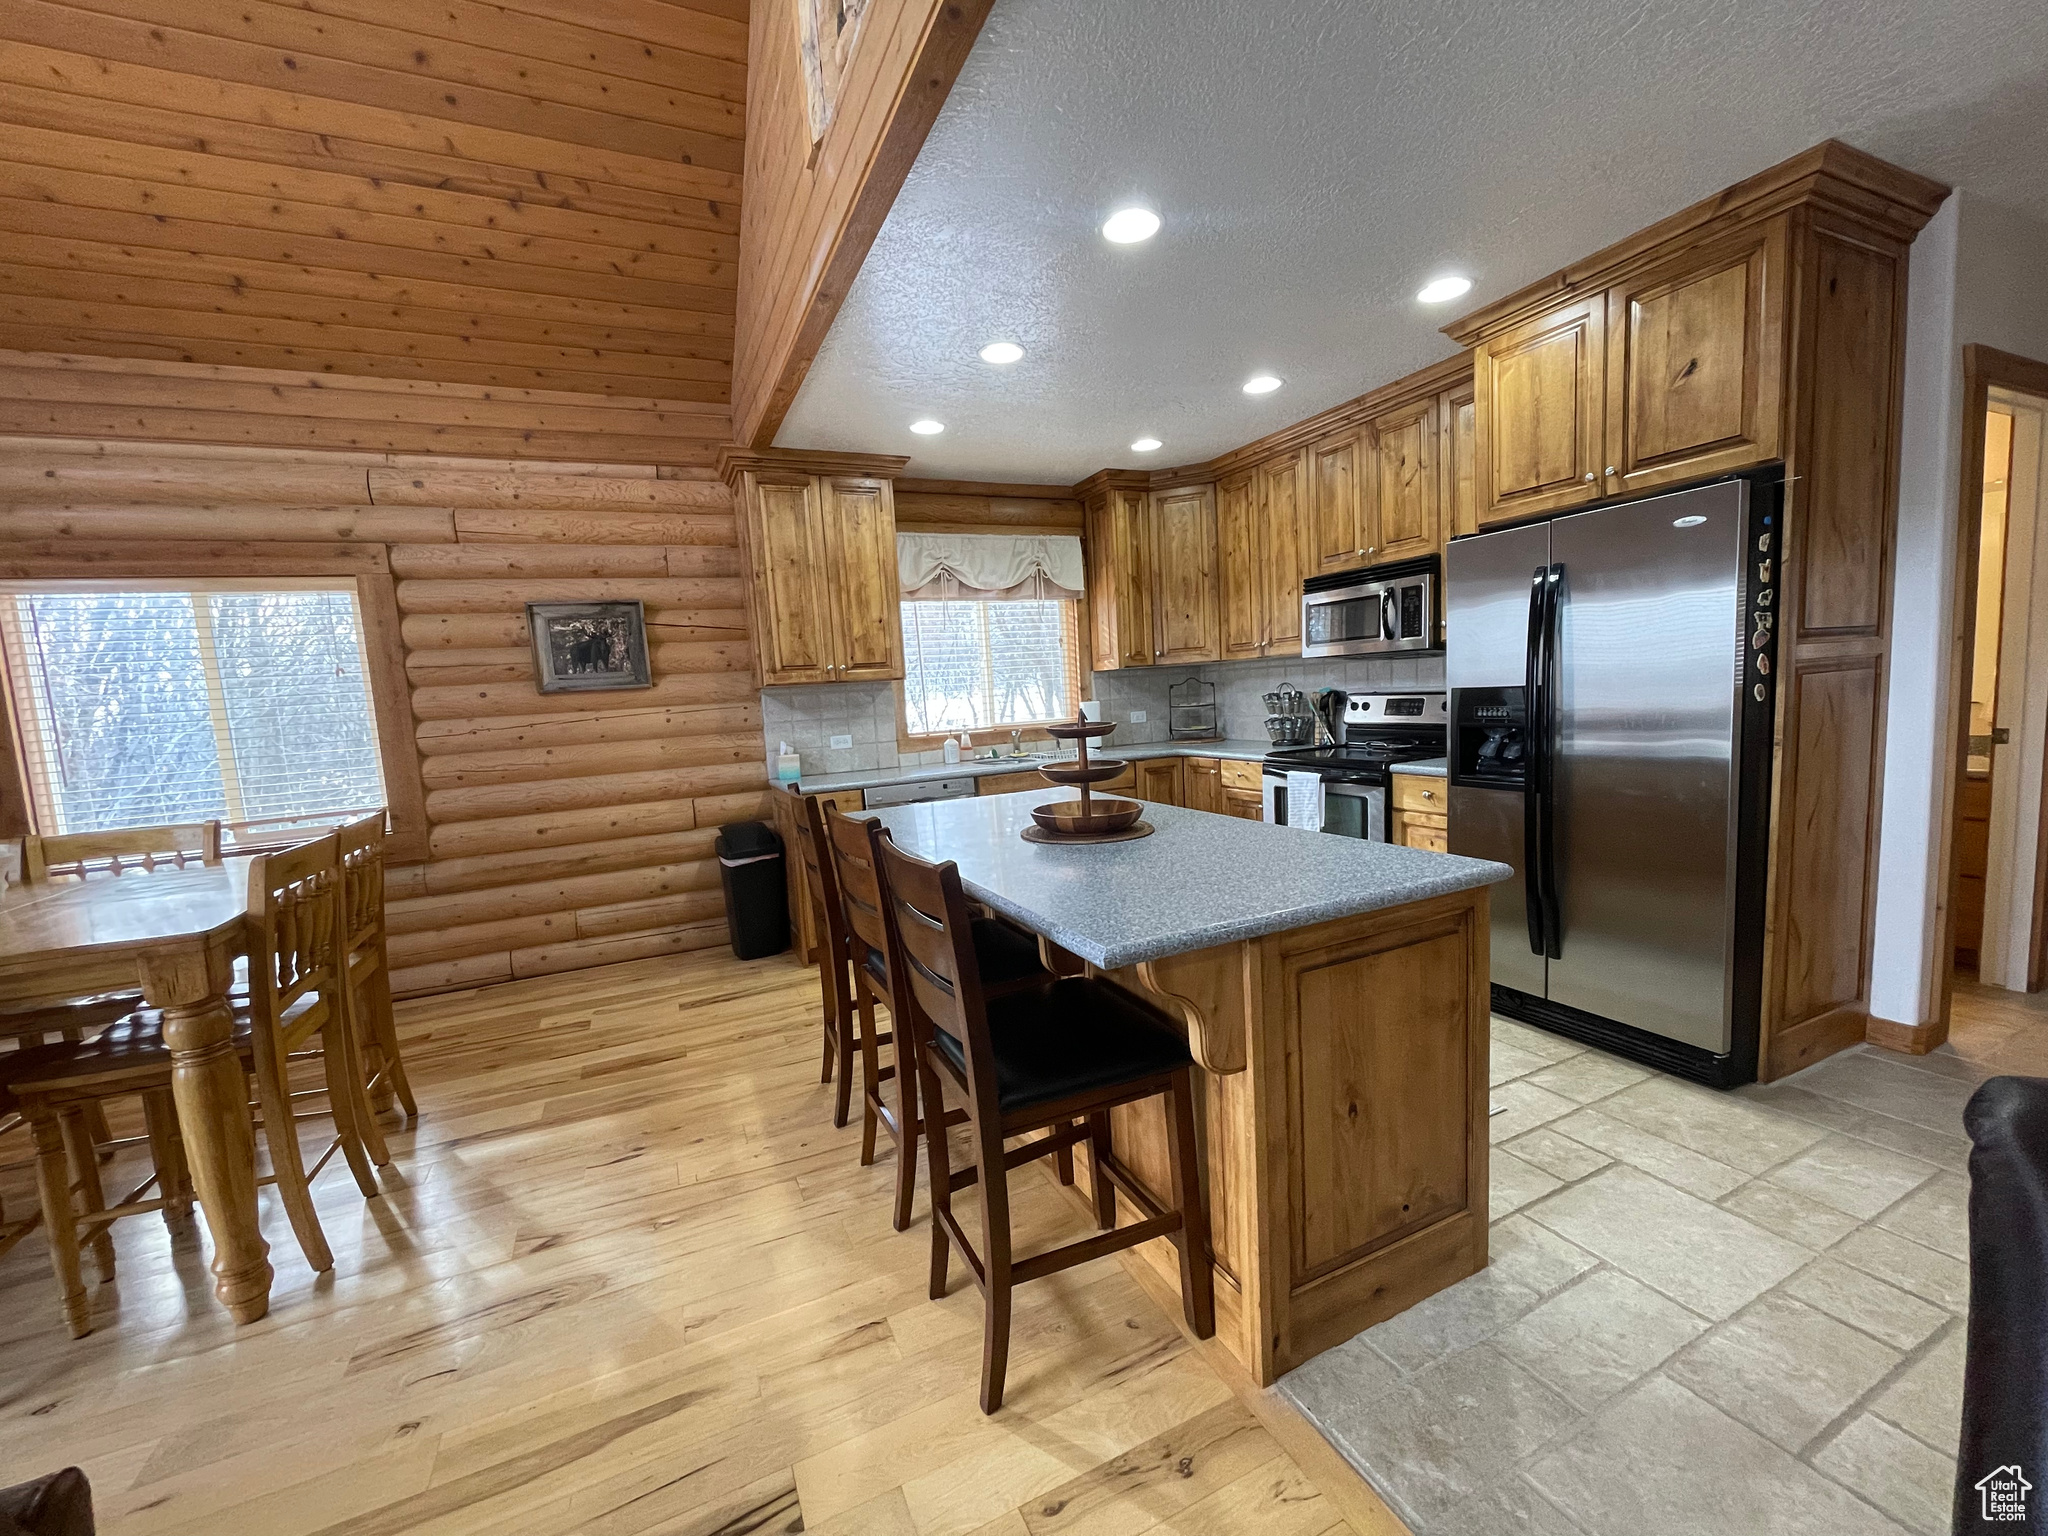 Kitchen featuring appliances with stainless steel finishes, a textured ceiling, light hardwood / wood-style flooring, rustic walls, and a kitchen island